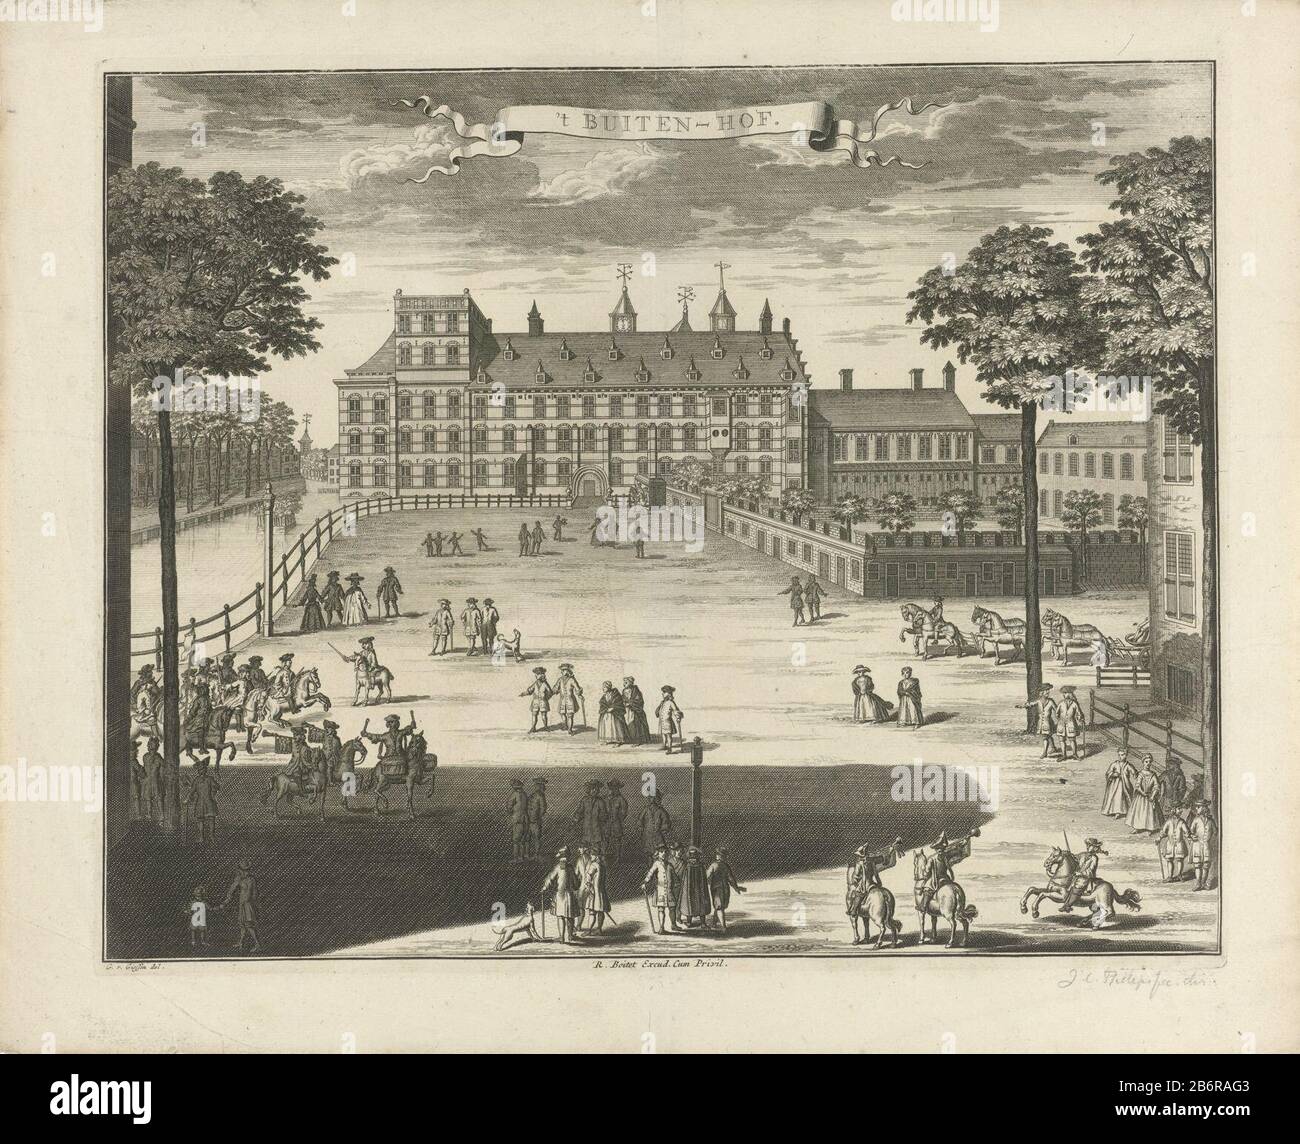 Gezicht op het Buitenhof te Den Haag 't Buiten-hof (titel op object) face on the Buitenhof, the Hague, in the background the Courtyard. On the Buitenhof several figures and ruiters. Manufacturer : print maker: anonymously to drawing of: Gerrit van Giessen (indicated on object) publisher: Reinier Boitet (indicated on object) publisher: Adrianus Douci Pietersz Grantor of privilege: unknown (indicated on object) Place manufacture: to order of: the Hague Publisher: Delft Publisher: Amsterdam Date: 1730 - 1736 Material: paper Technique: etching / engra (printing process) Measurements: plate edge: h Stock Photo